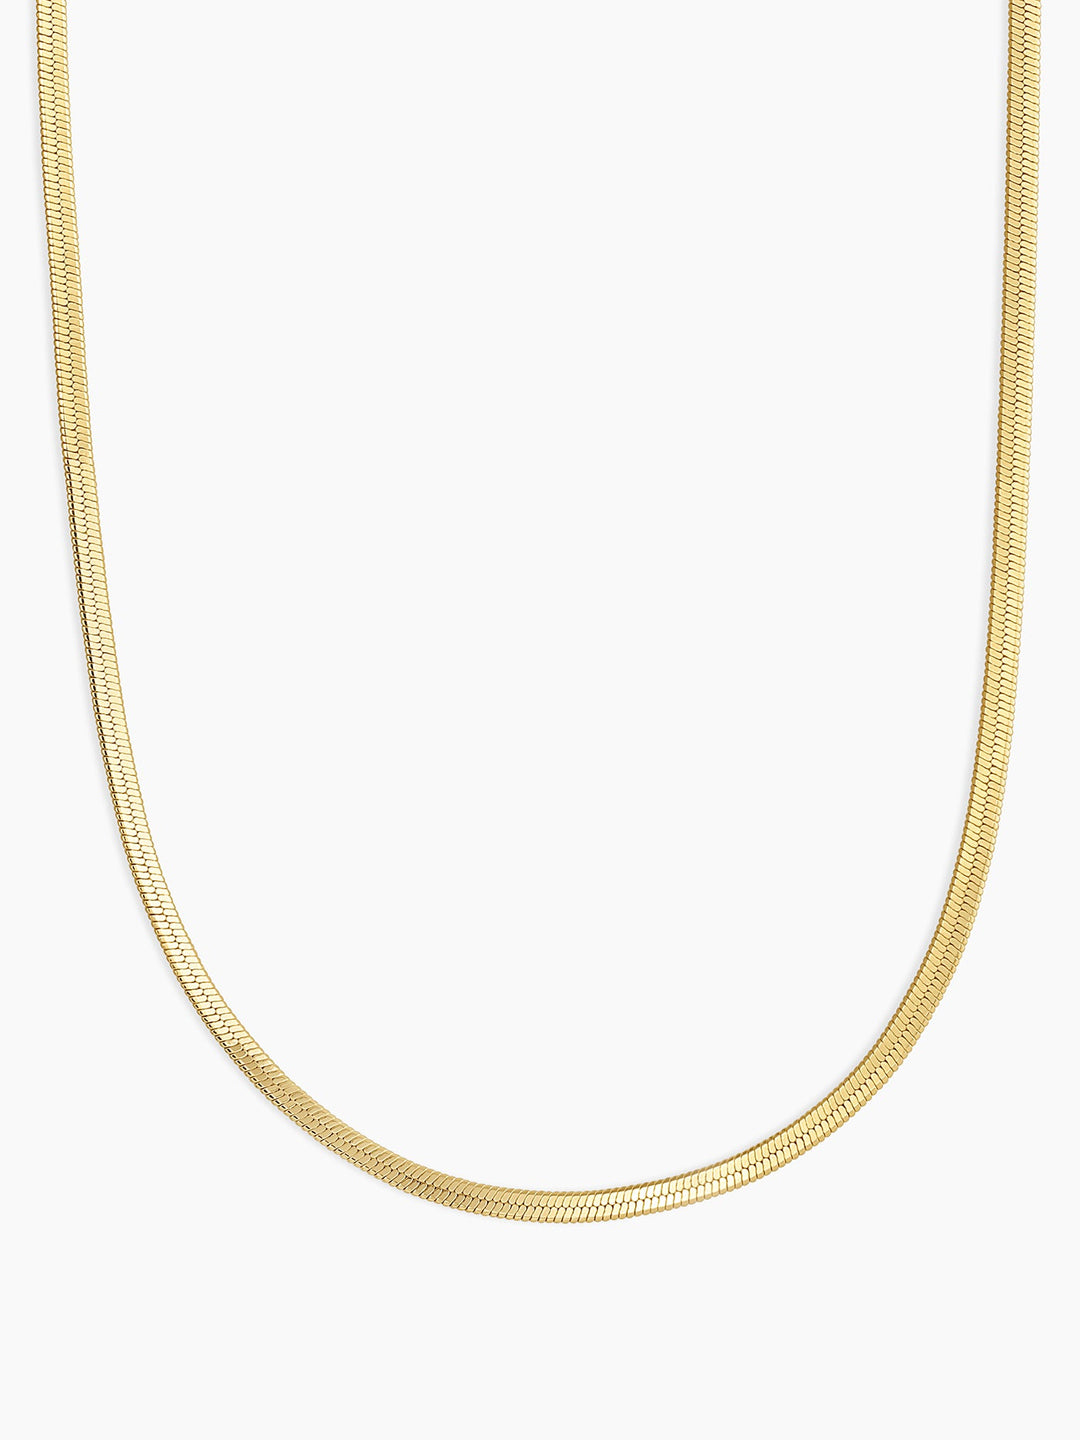 Necklaces for Women: Gold, Silver, & Rose Gold